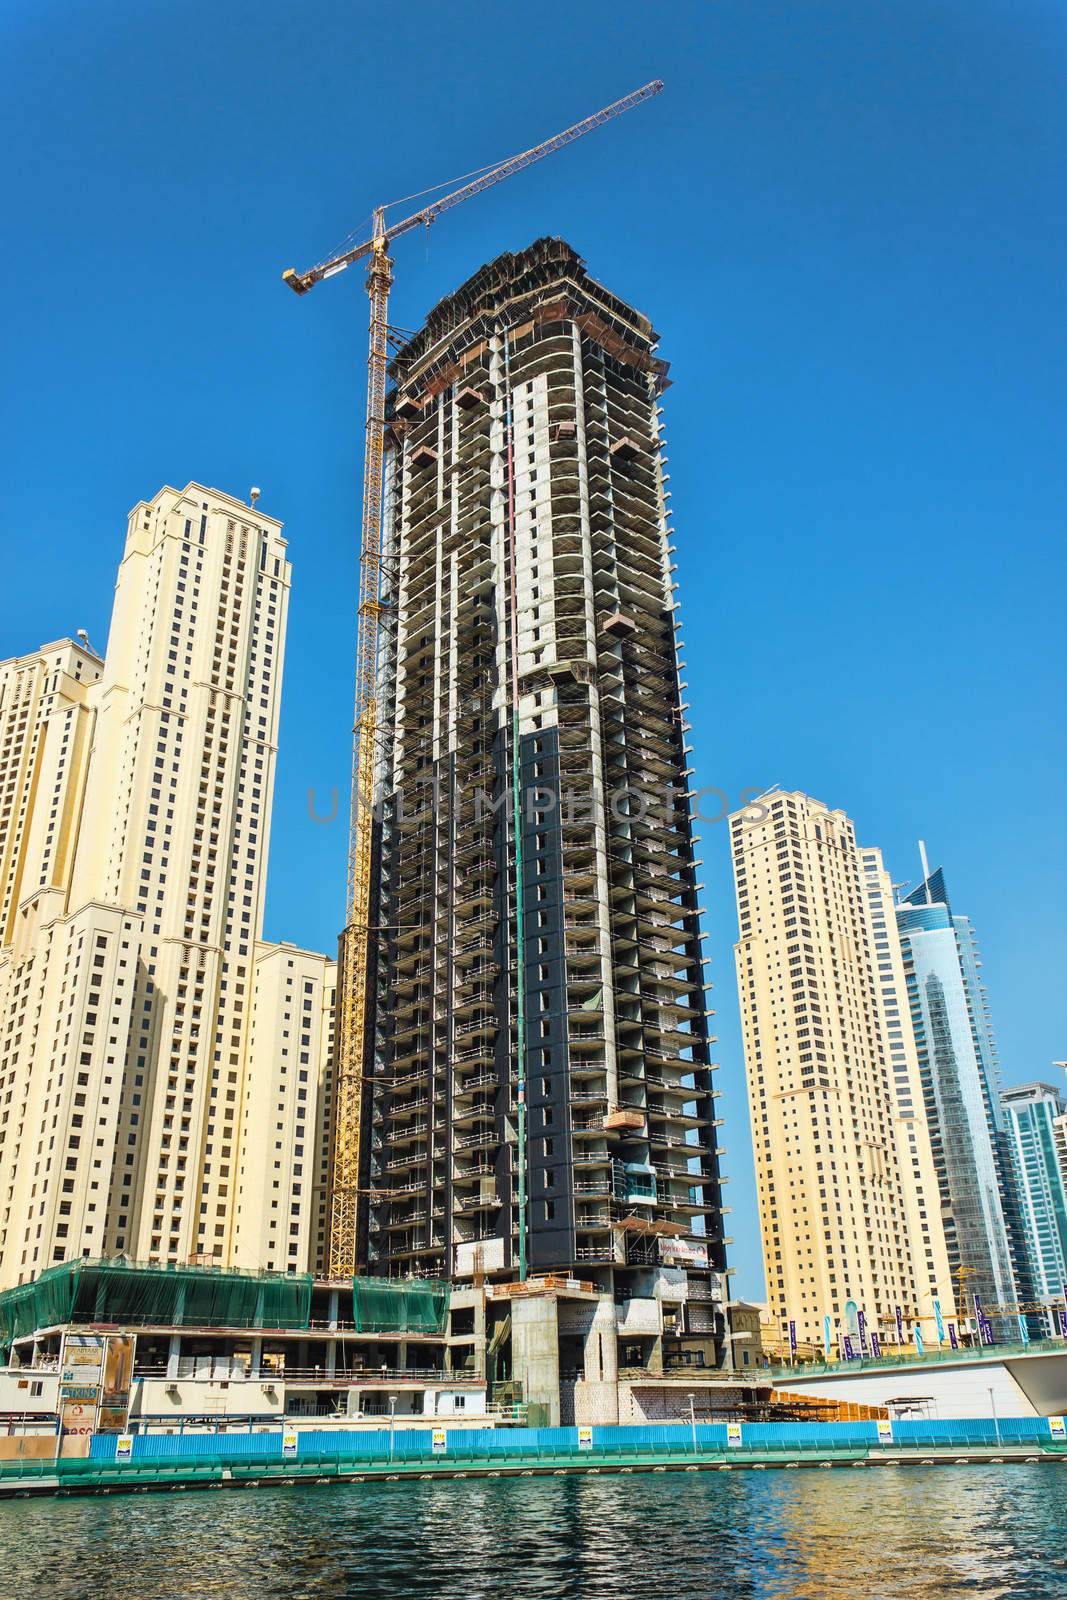 DUBAI, UAE - NOVEMBER 16:  Dubai Marina. Construction of skyscrapers in Dubai, UAE,  November 16, 2012. Skyscraper under construction in foreground. Dubai was the fastest developing city in the world between 2002 and 2008.